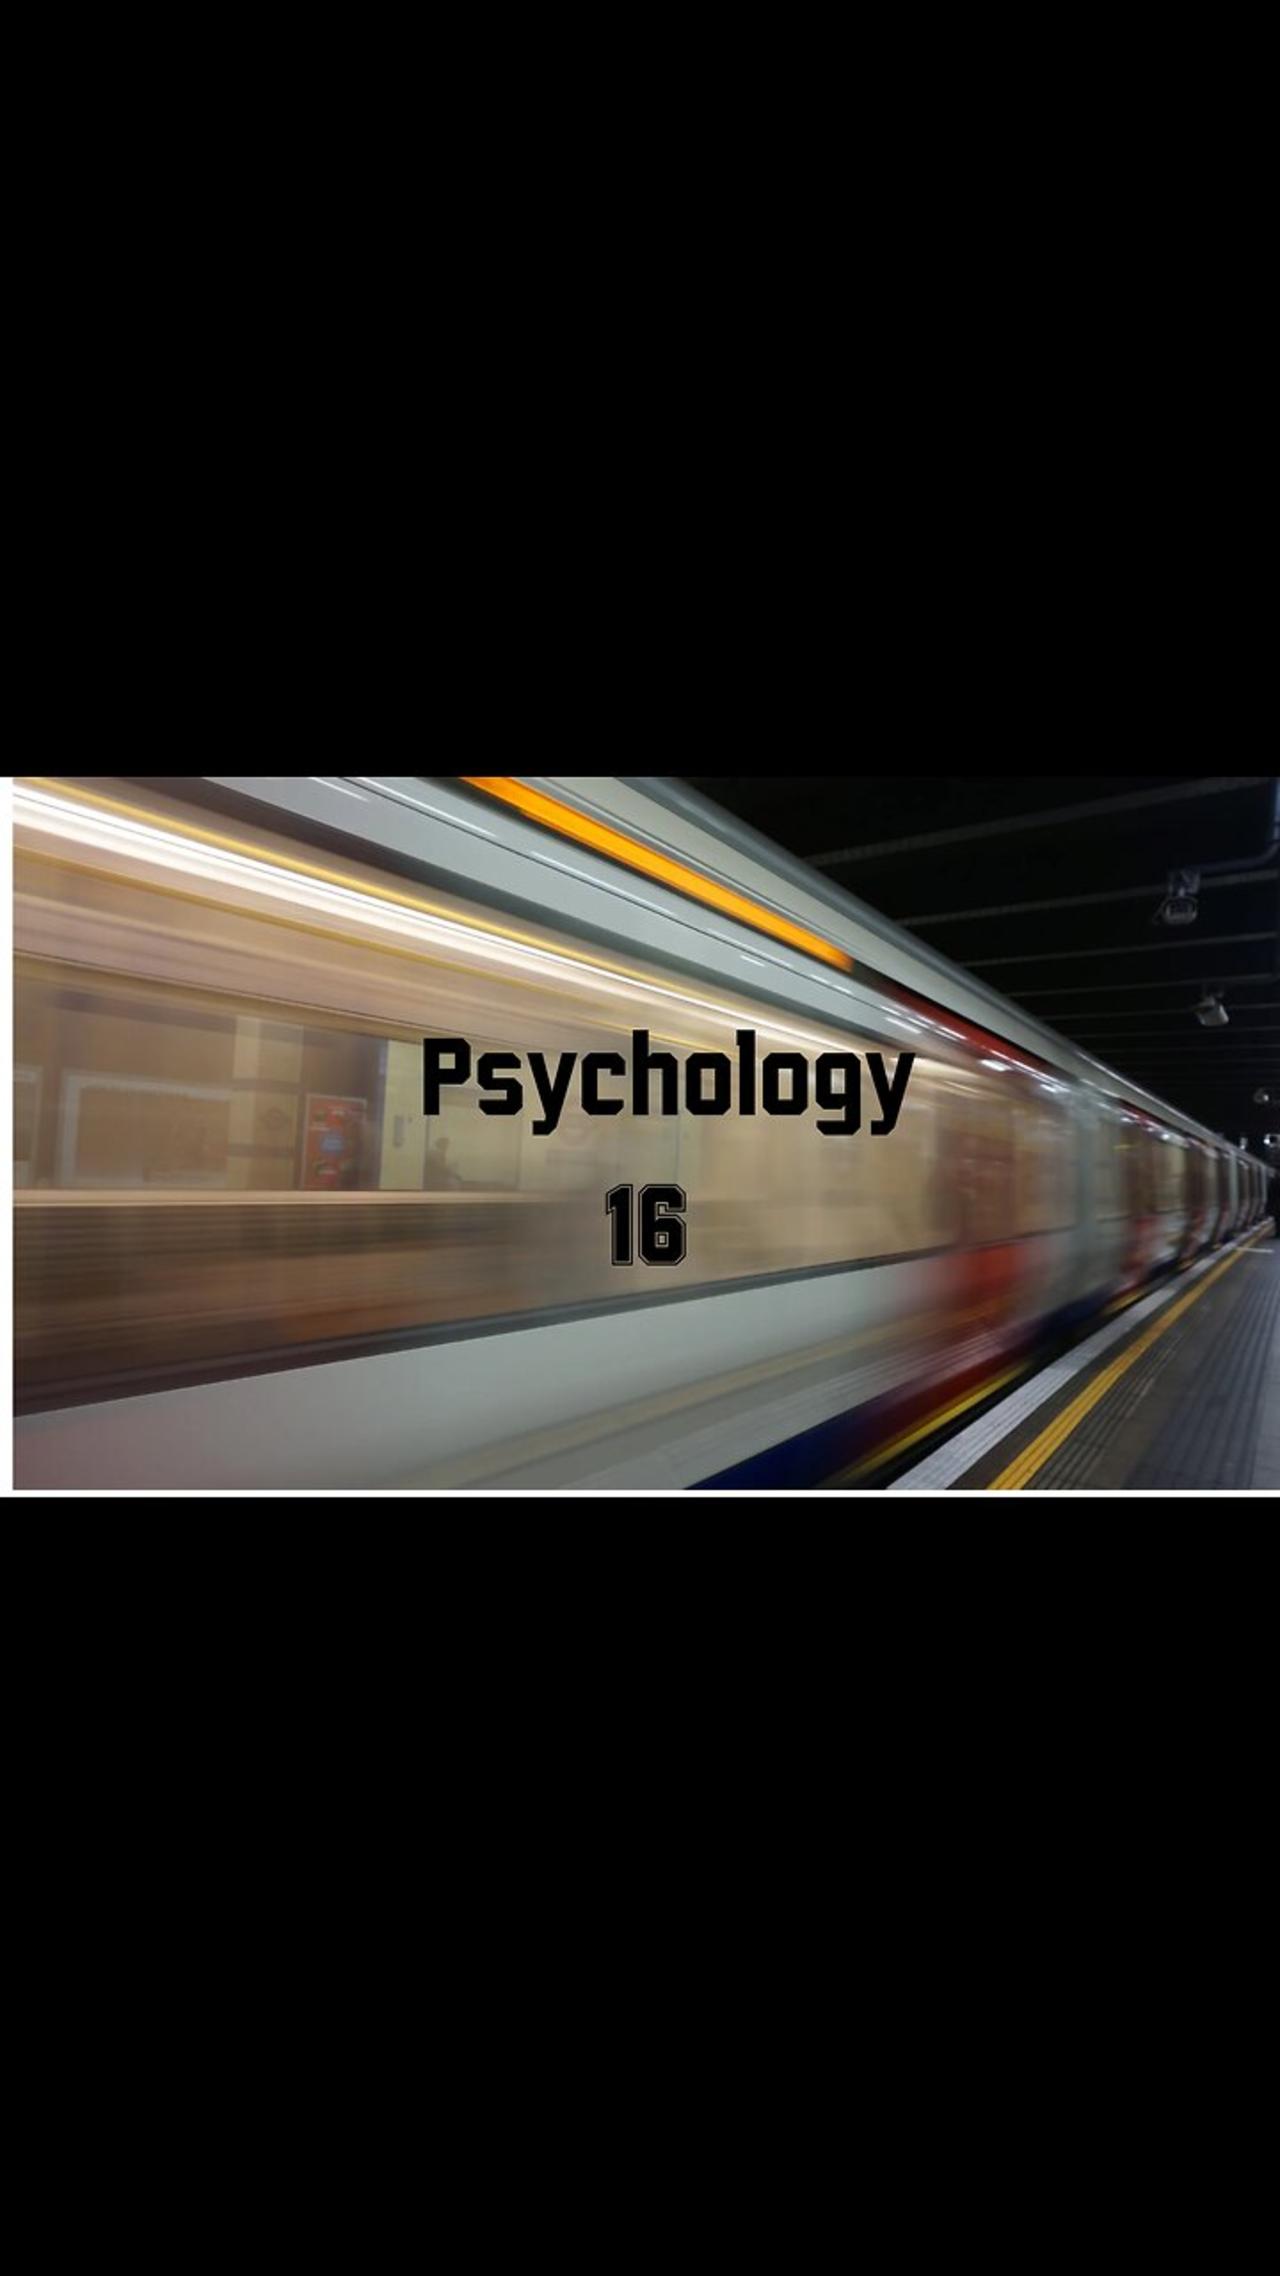 Psychology – One News Page VIDEO